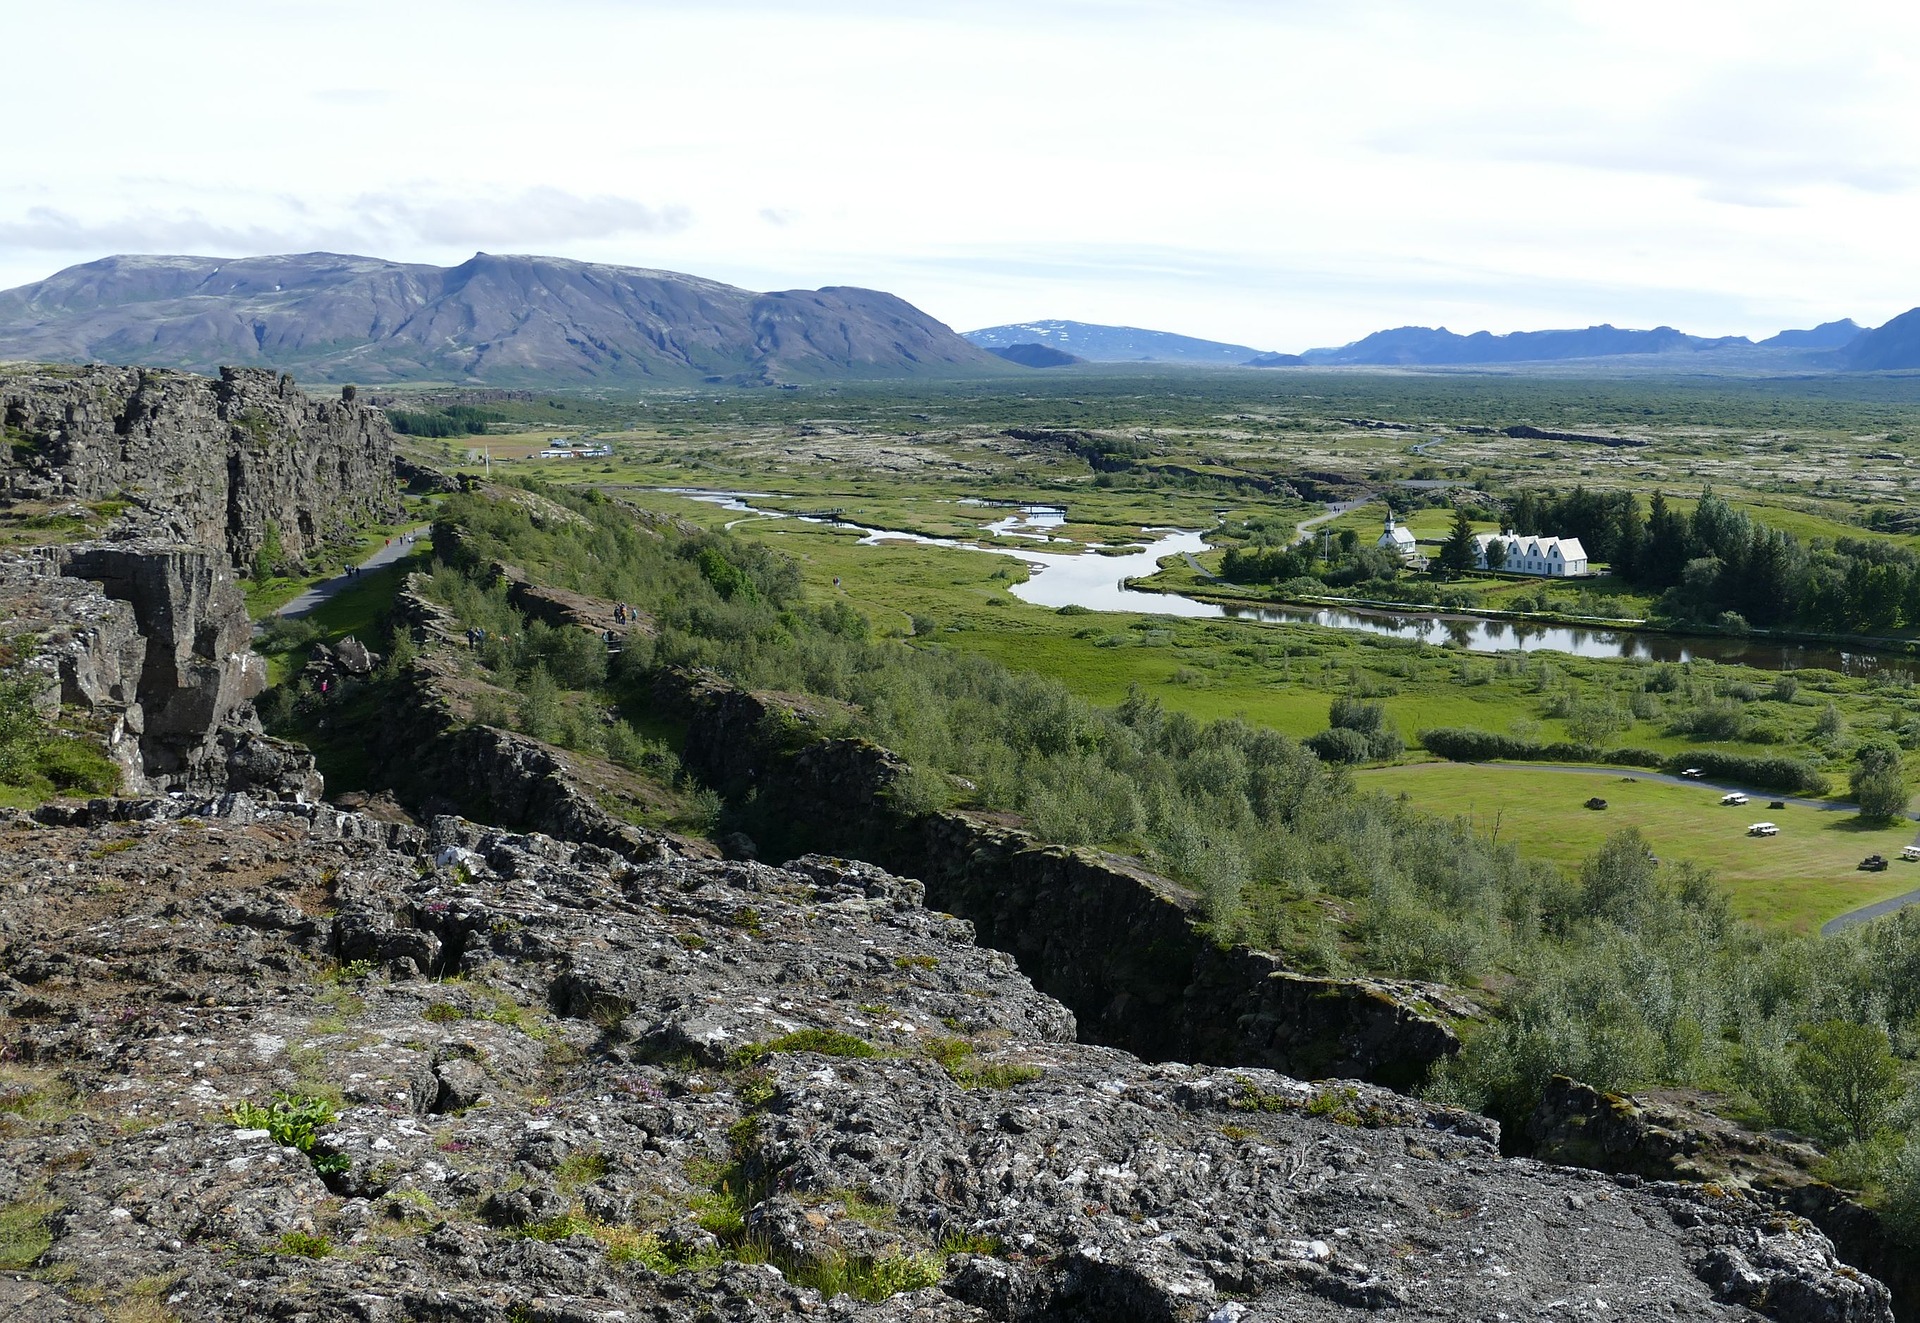 National park of Thingvellir, rocks on the foregroung, grass, tress, mountains on the background